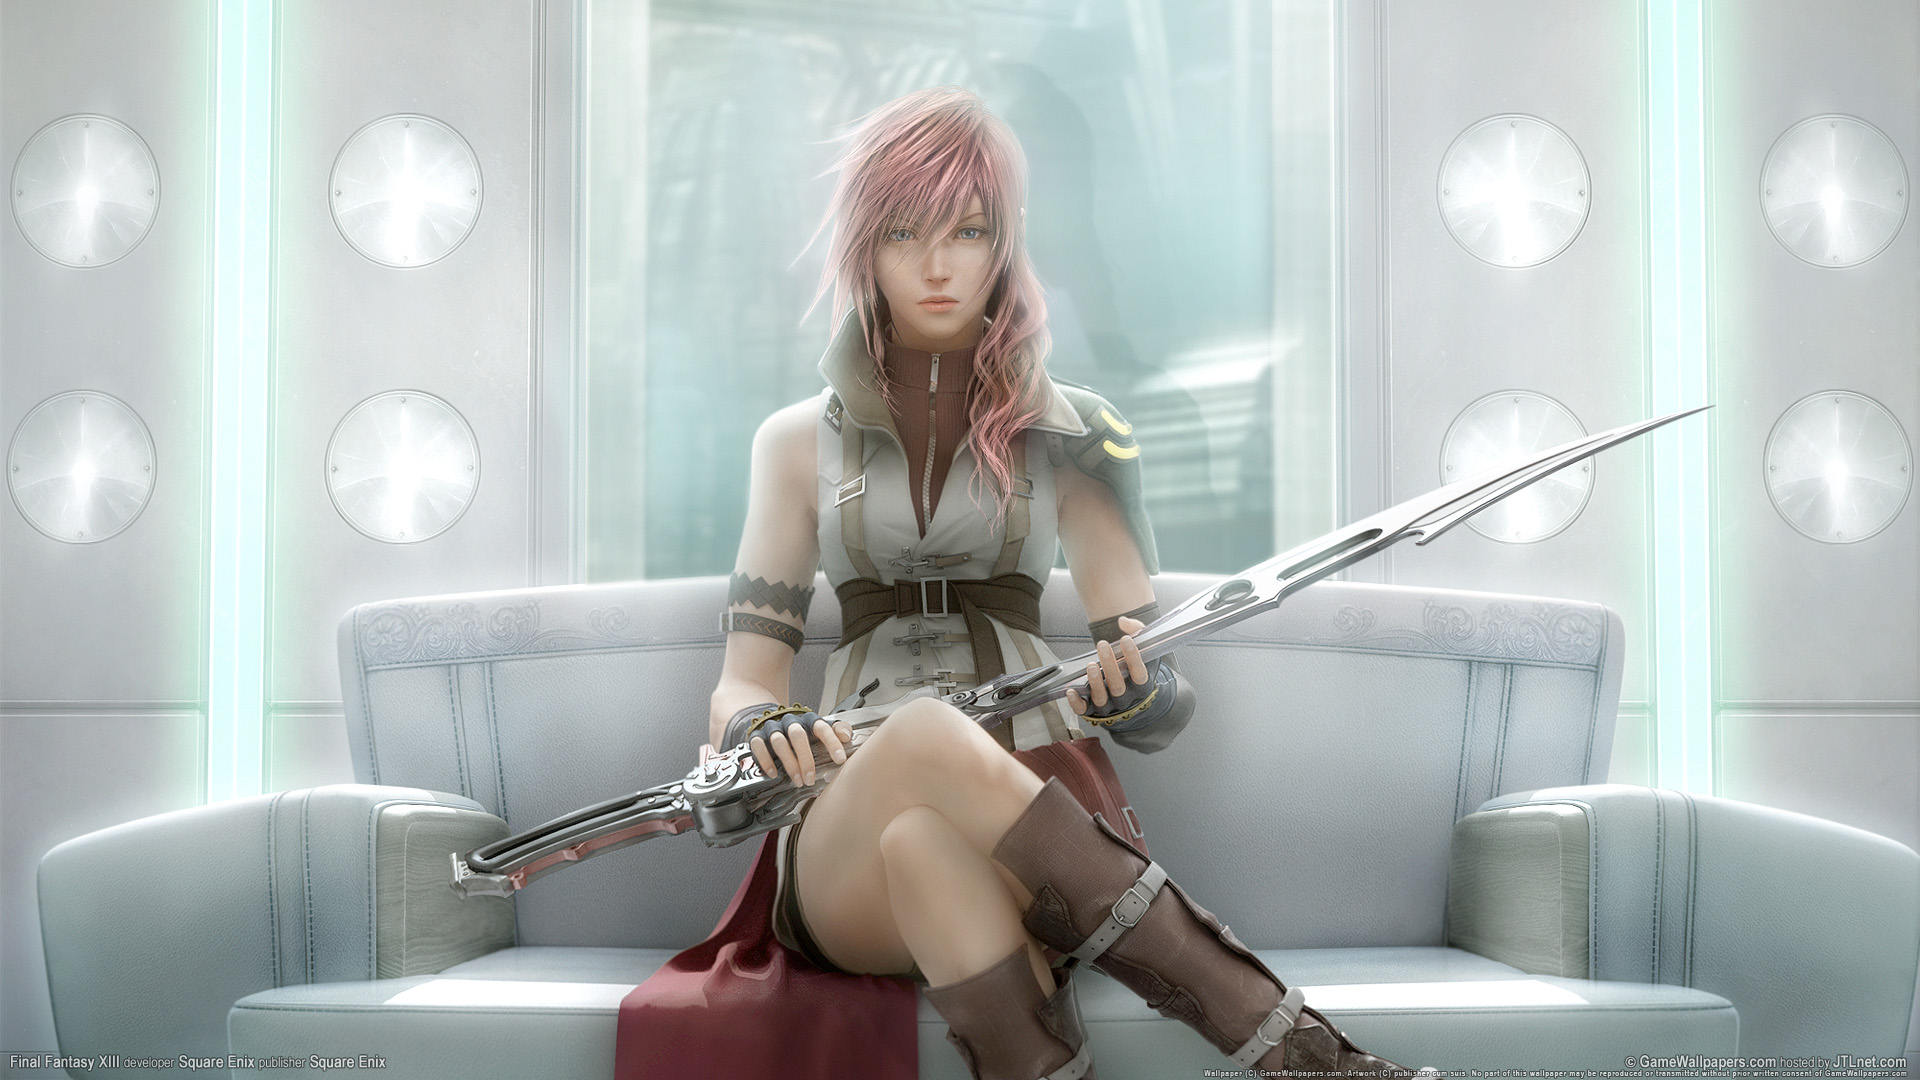 Free Download Final Fantasy Xiii Hd Wallpaper Full Hd Wallpapers Download 1080p 19x1080 For Your Desktop Mobile Tablet Explore 50 Final Fantasy Wallpapers 19x1080 Final Fantasy Hd Wallpapers Final